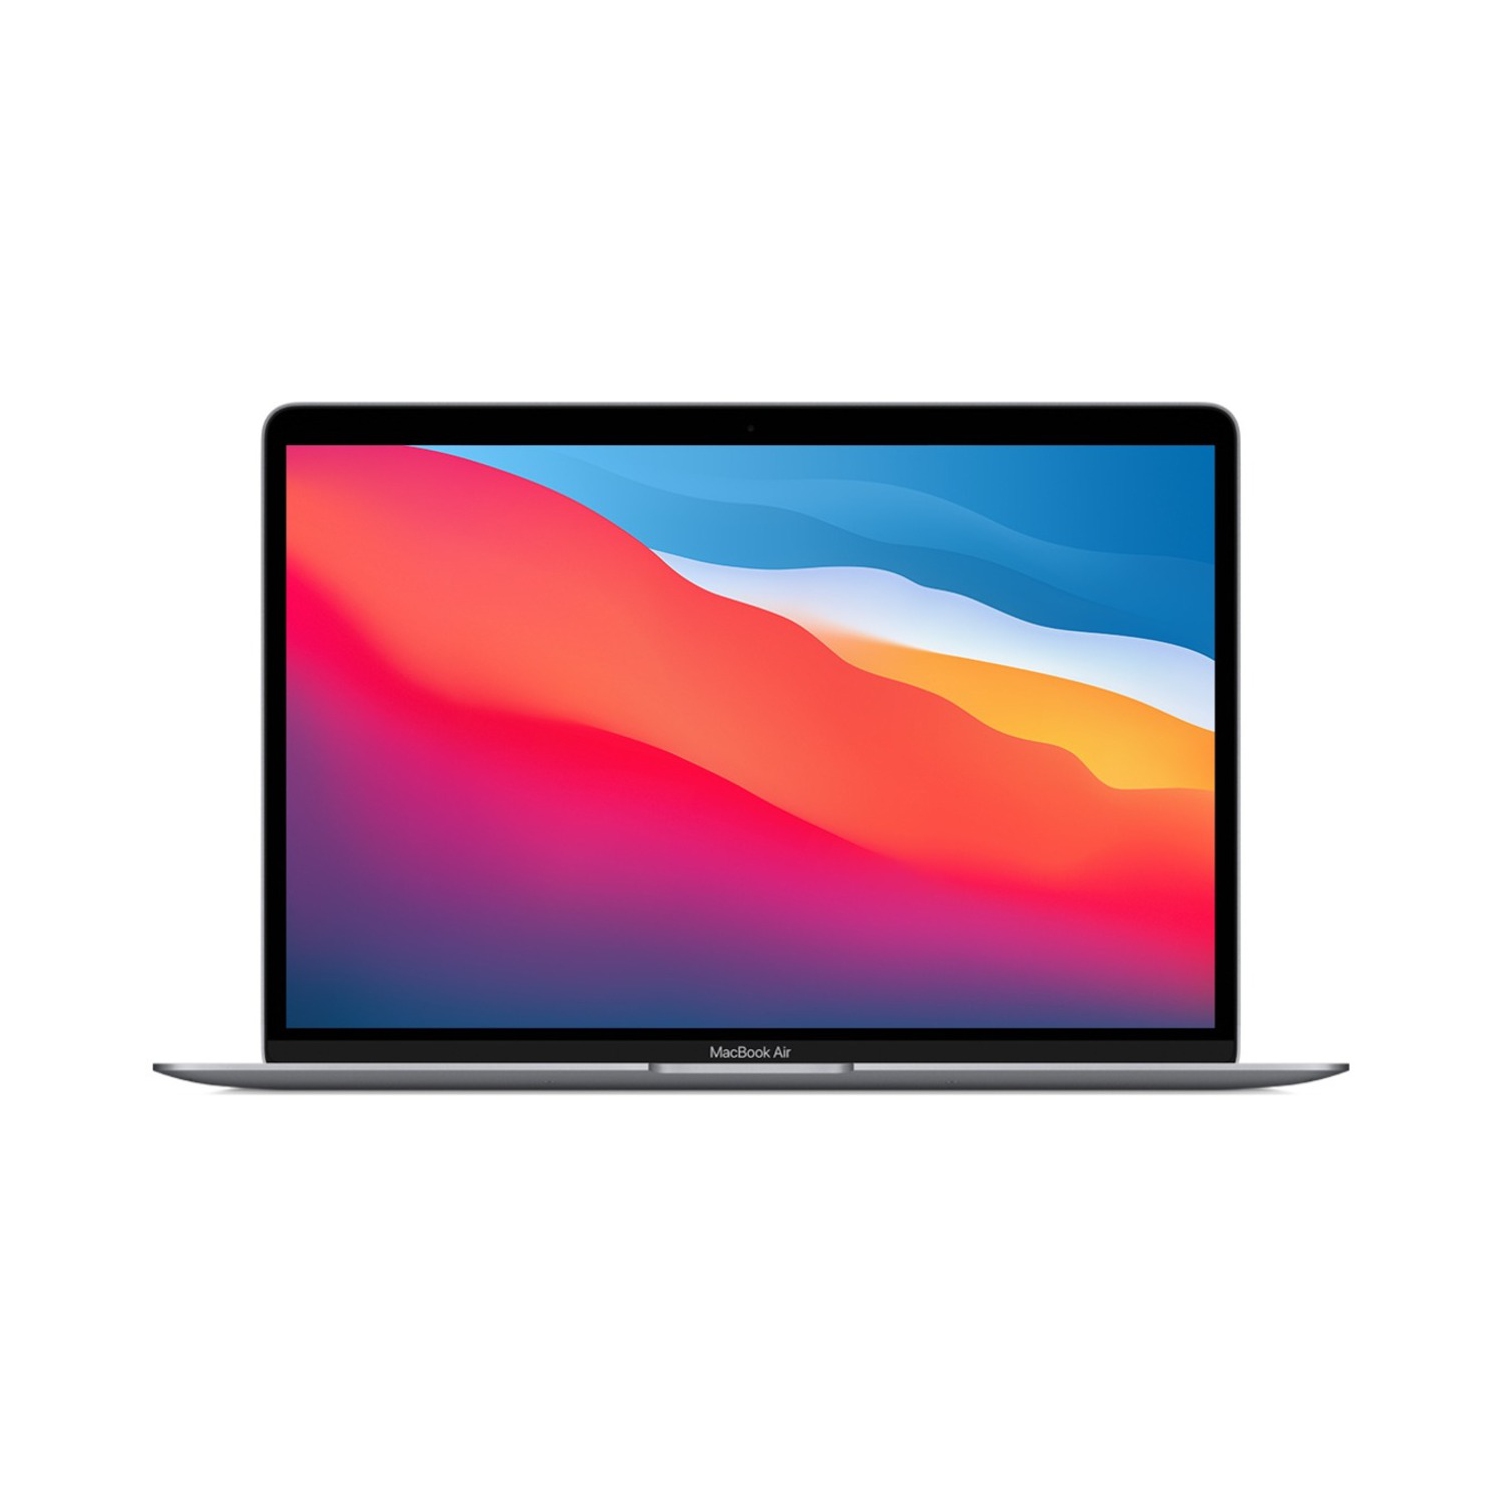 Refurbished (Excellent) - Apple MacBook Air MGN63LL/A 13.3